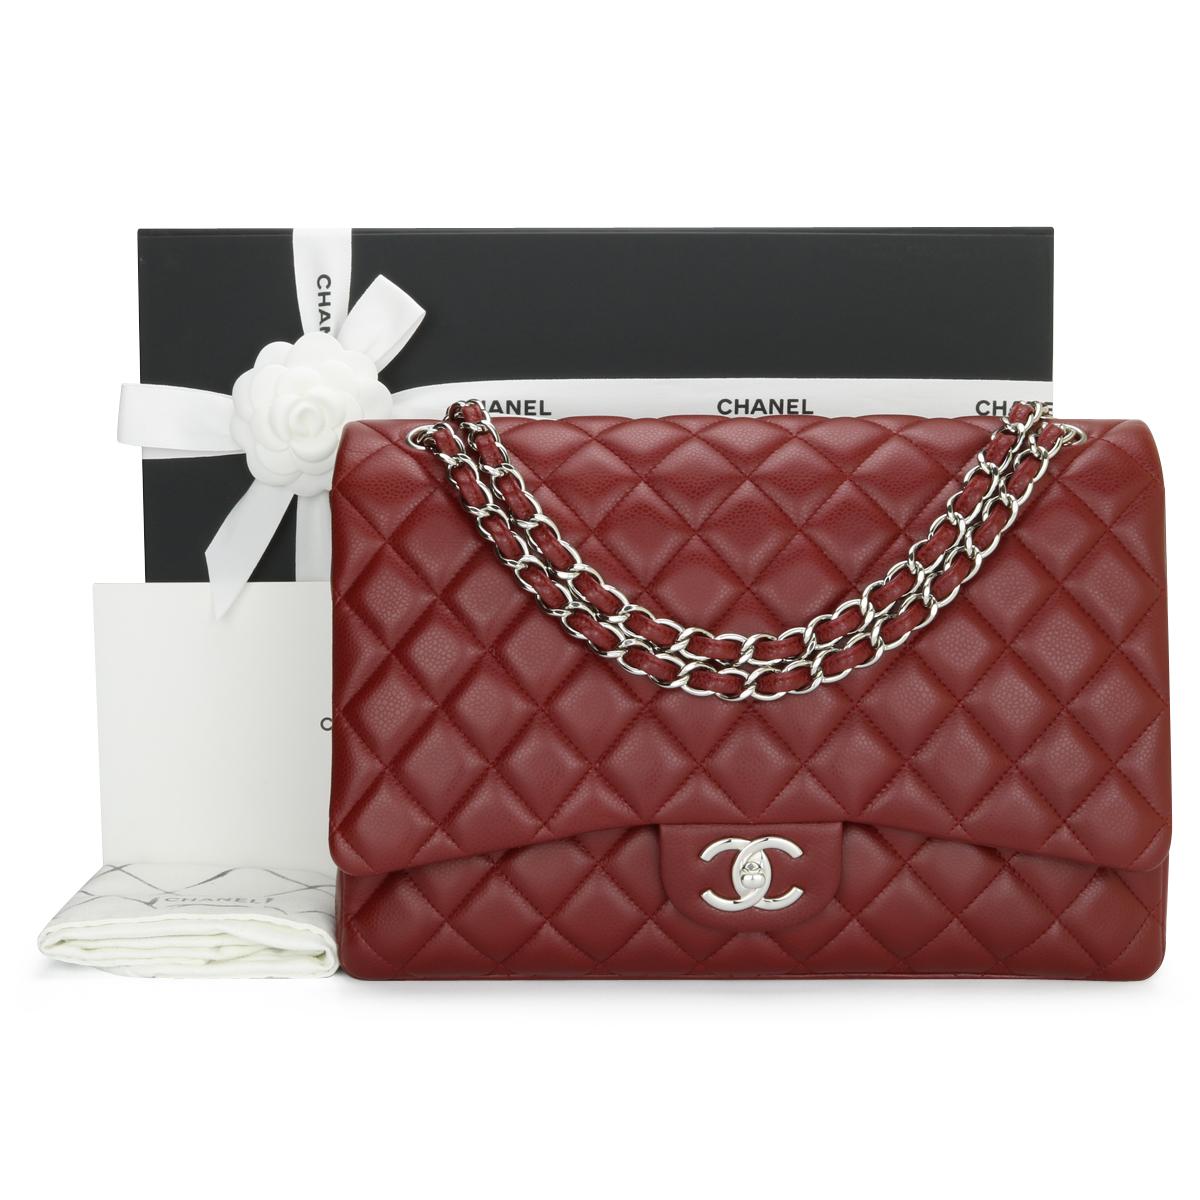 CHANEL Classic Double Flap Maxi Bag Dark Red Burgundy Caviar with Silver Hardware 2011.

This stunning bag is in excellent condition. The bag still holds its original shape, and the hardware is still very shiny.

- Exterior Condition: Excellent